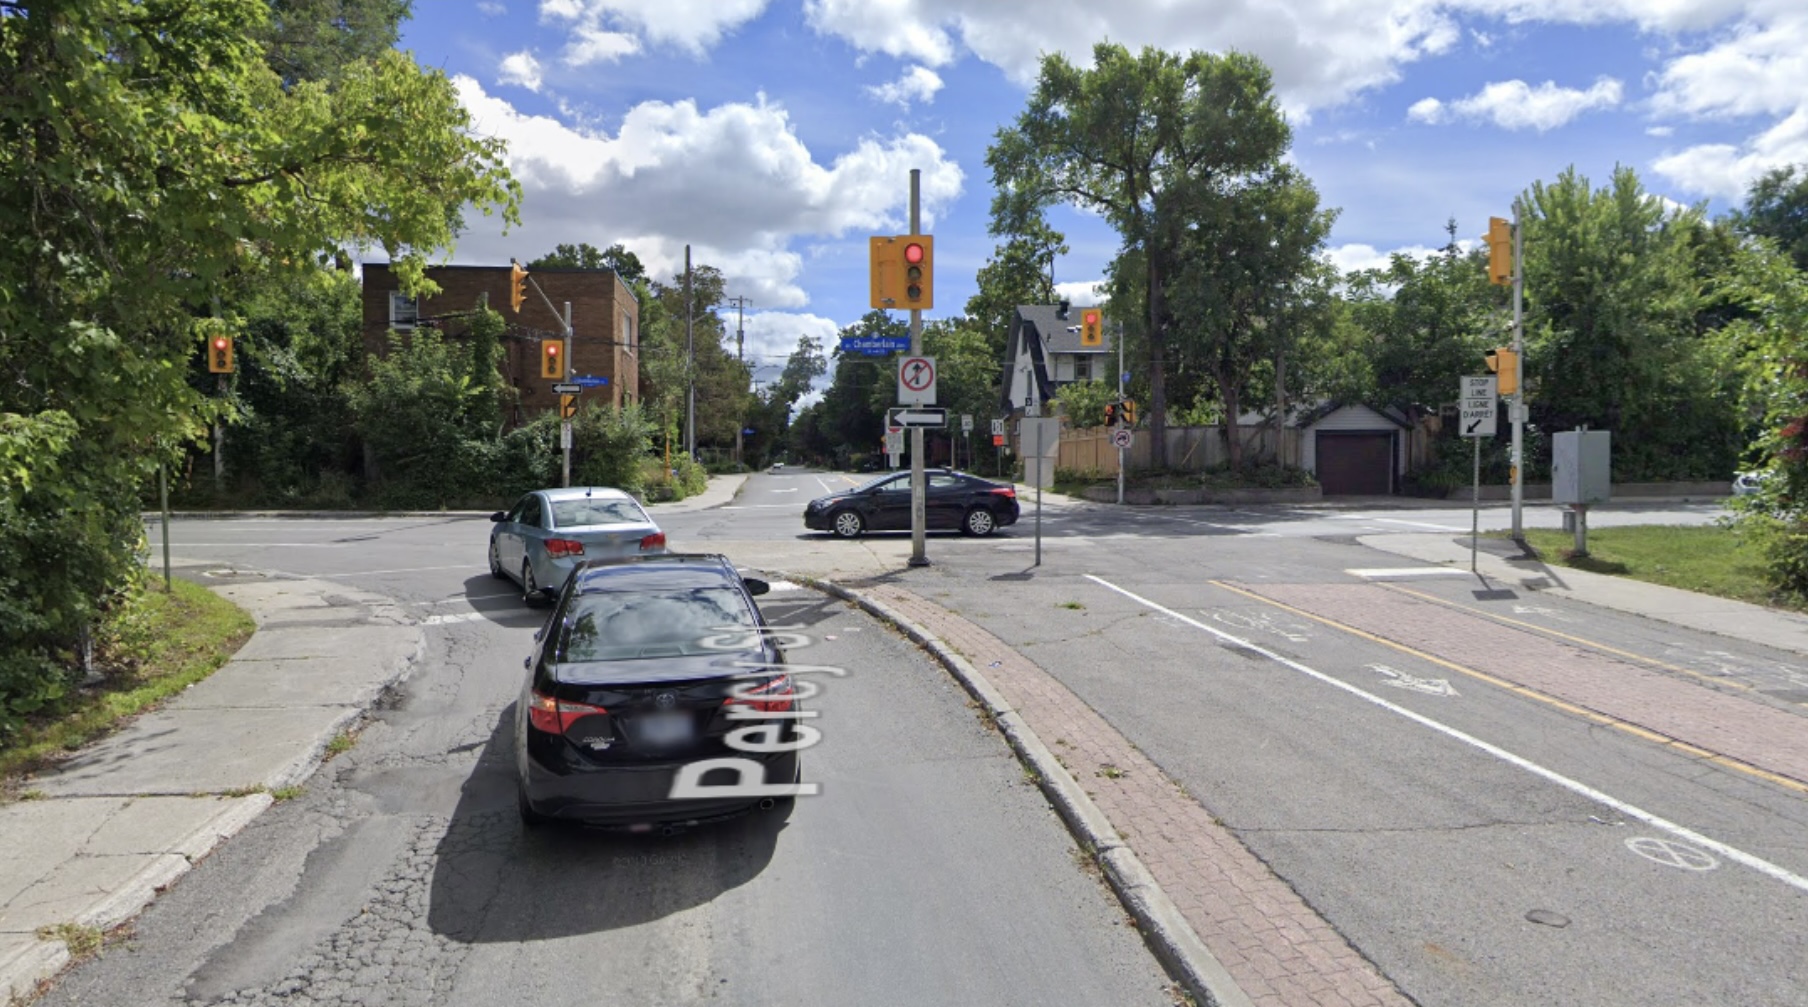 Google image of modal filtering with a car lane on the left and a multi use pathway on the right